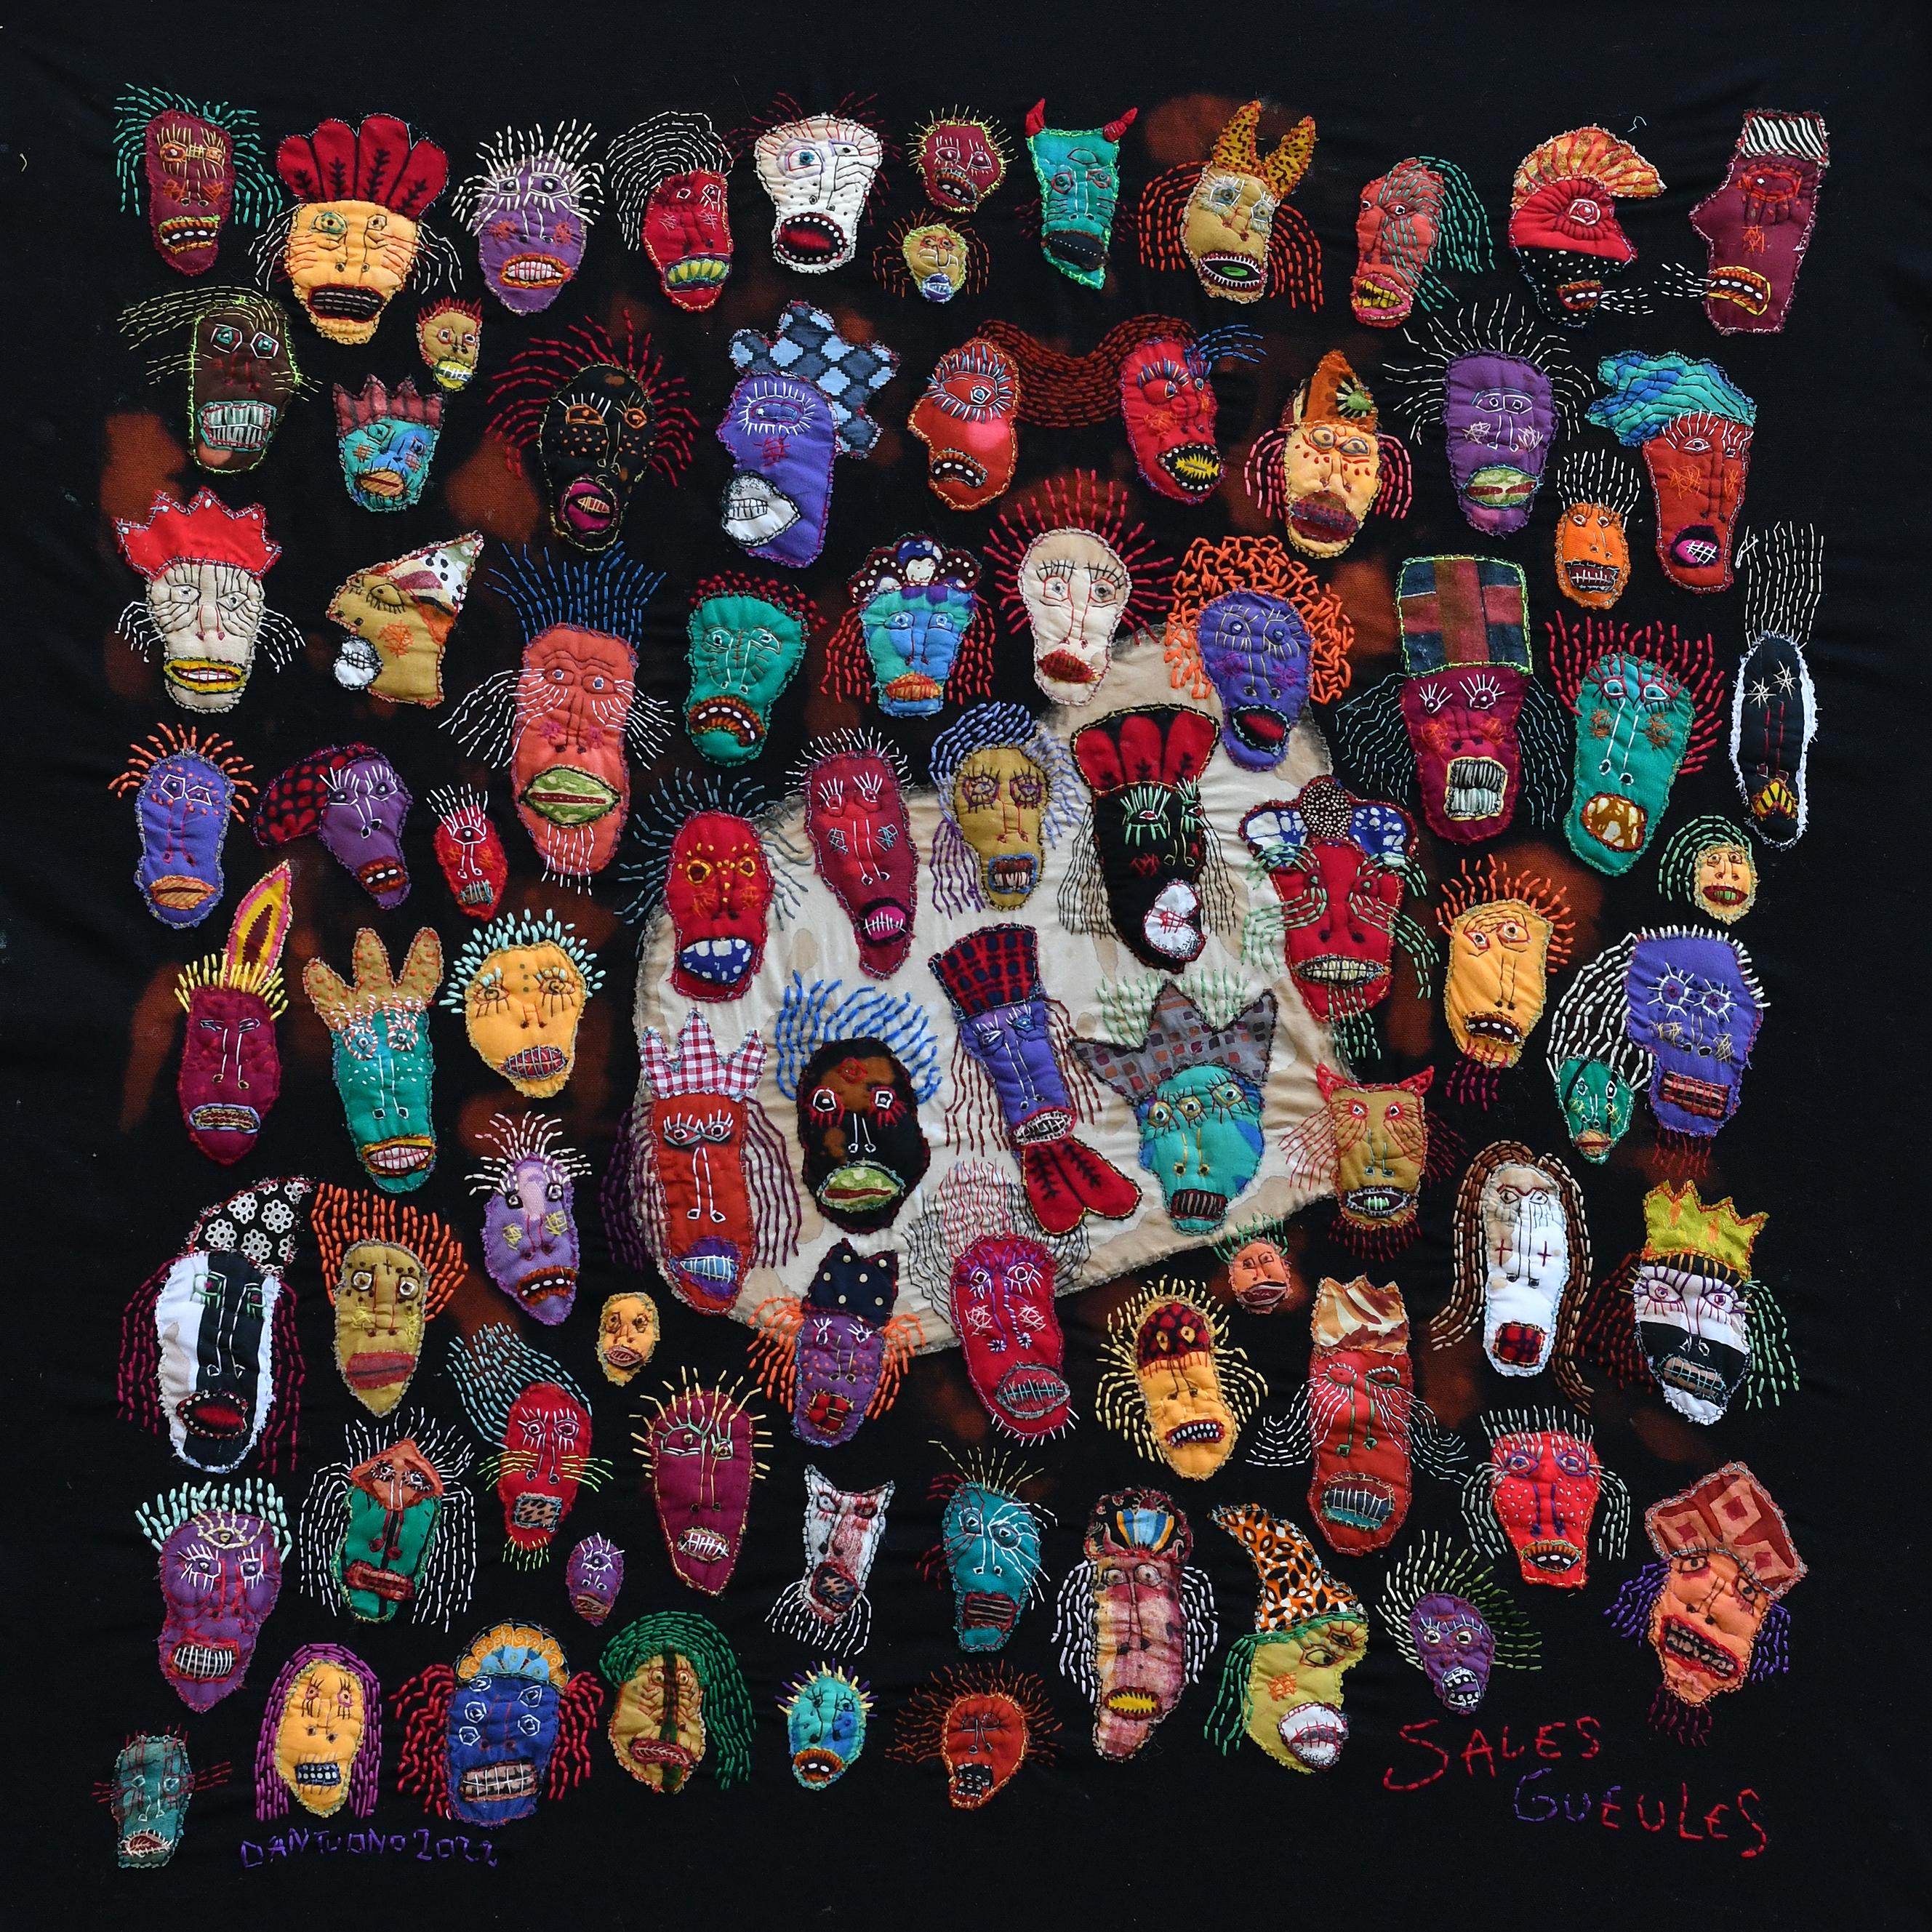 Ugly faces Barbara d'Antuono 21st Century Contemporary outsider art textile art 